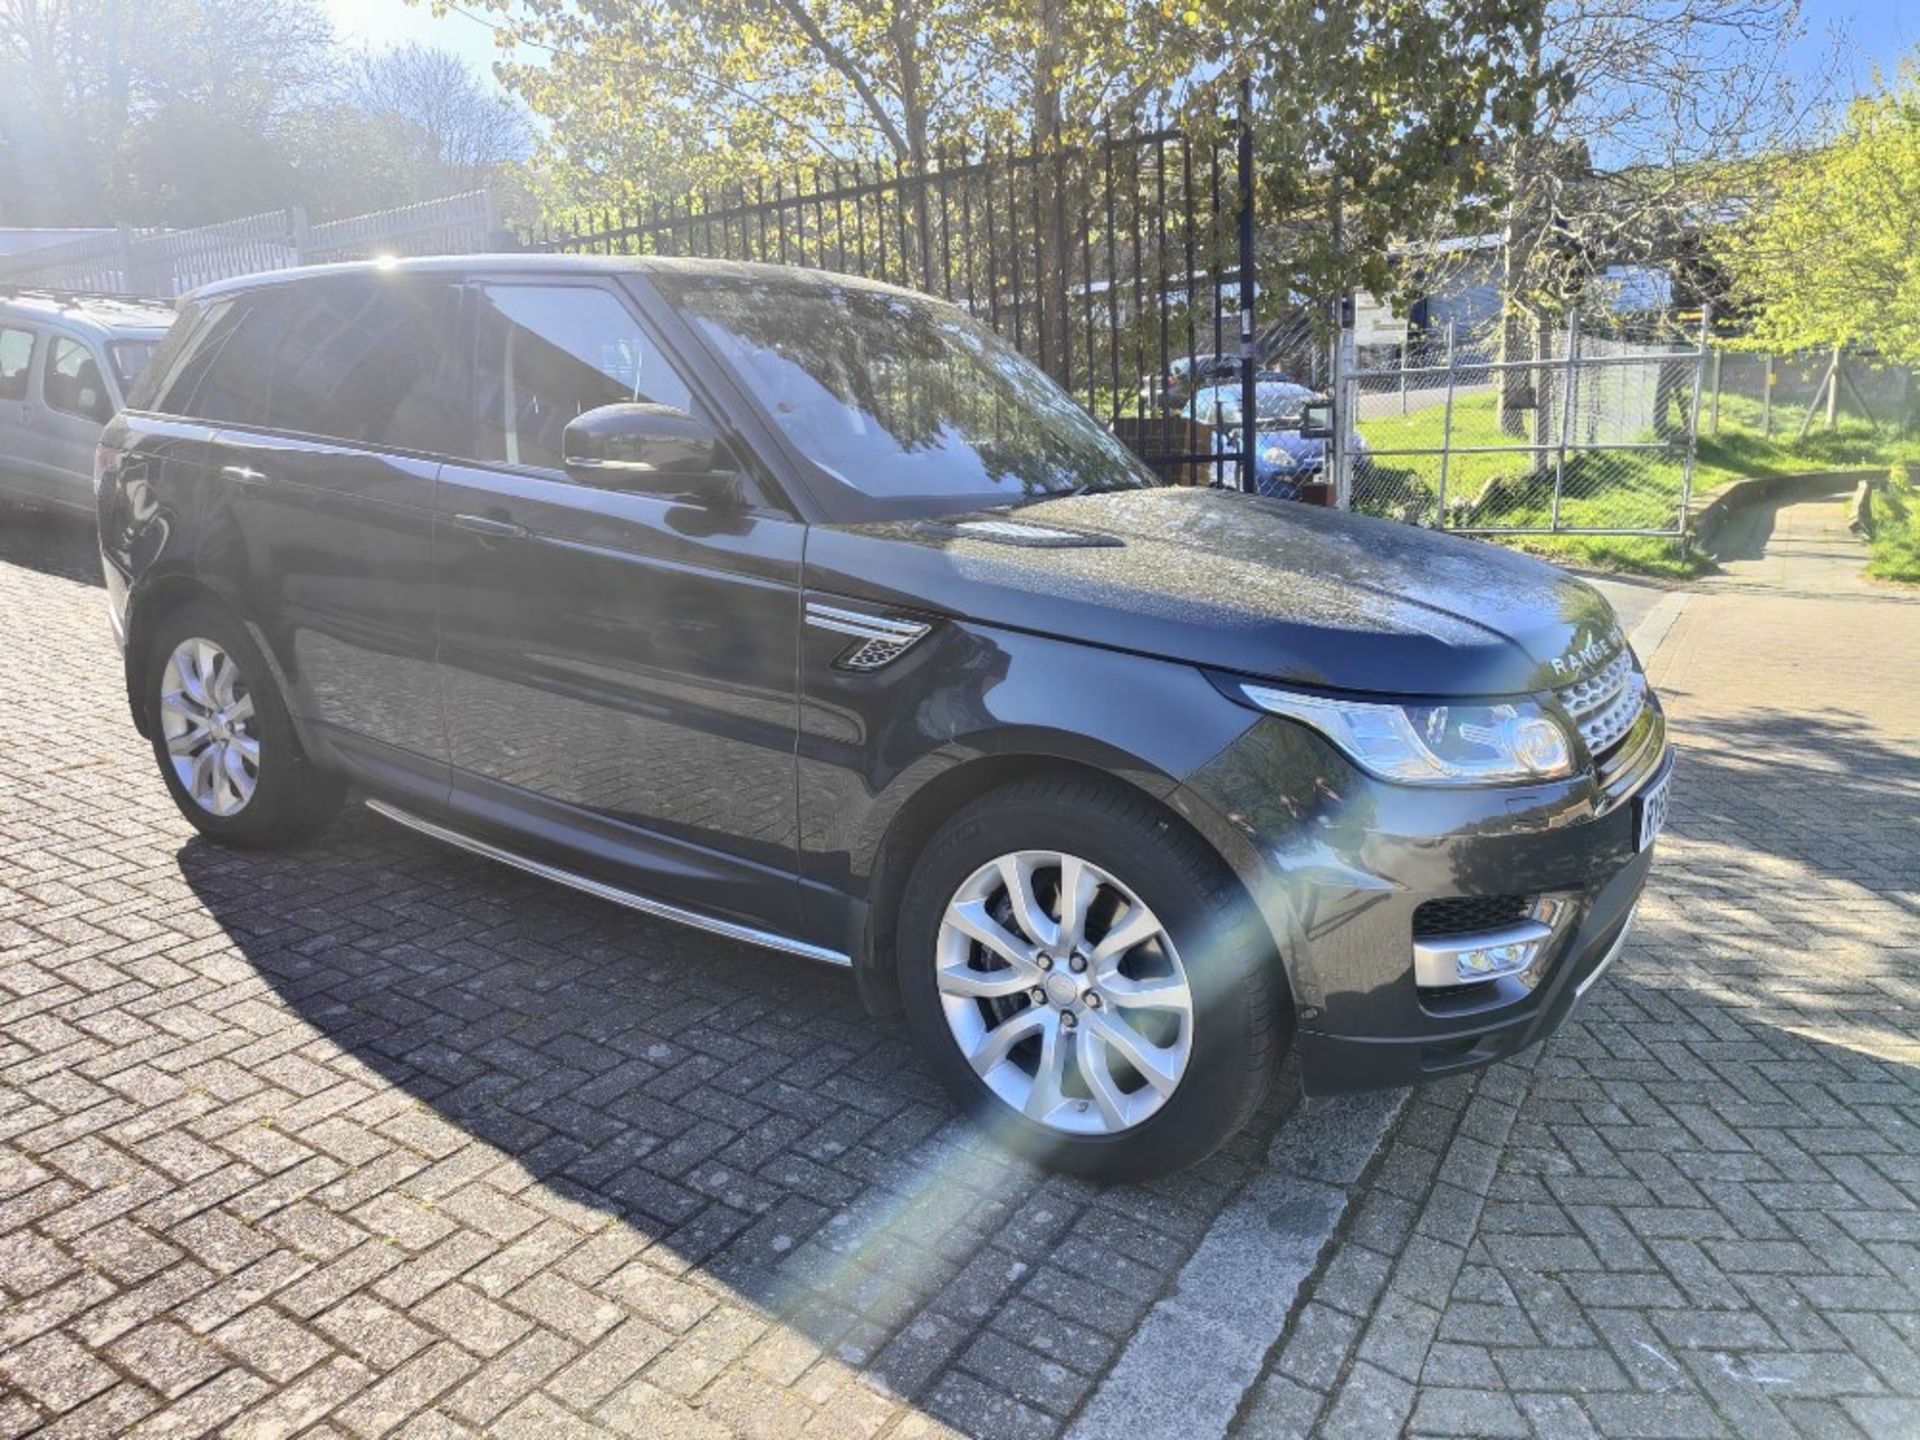 Range Rover Sport 3.0 SDV6 HSE Automatic - Image 2 of 18